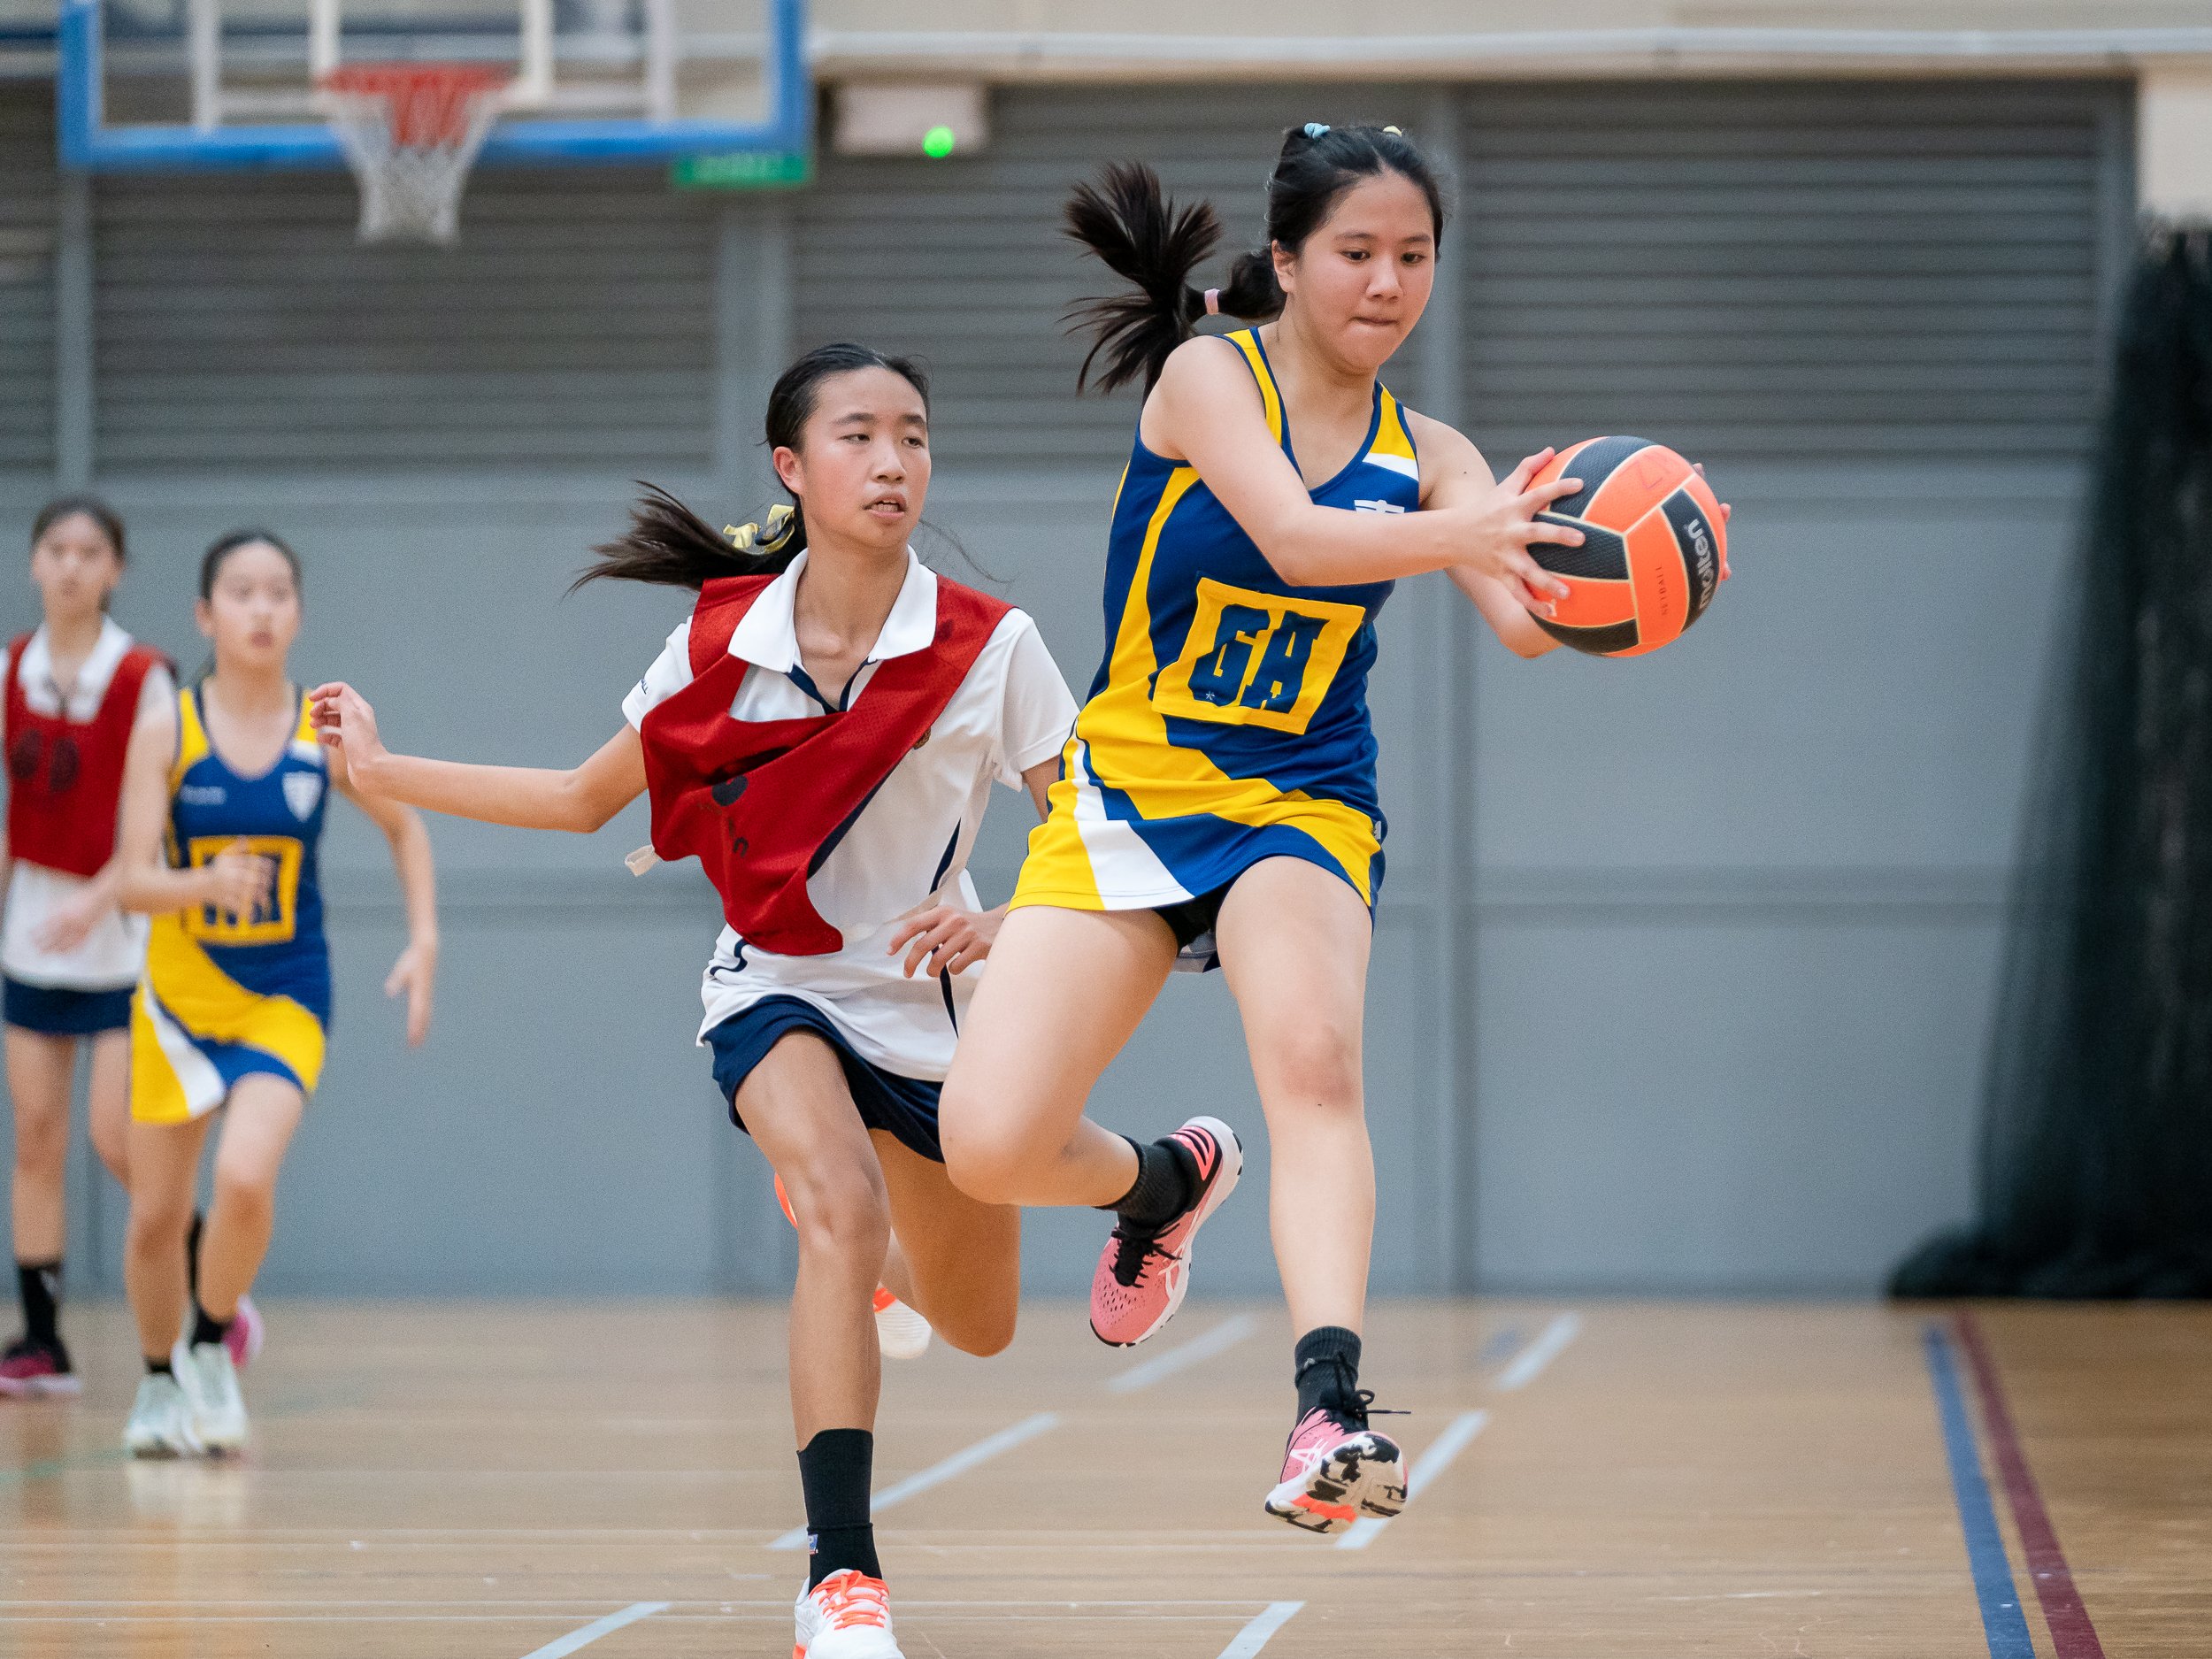 2022-05-19_NSG Netball_Photo By Ron Low_010